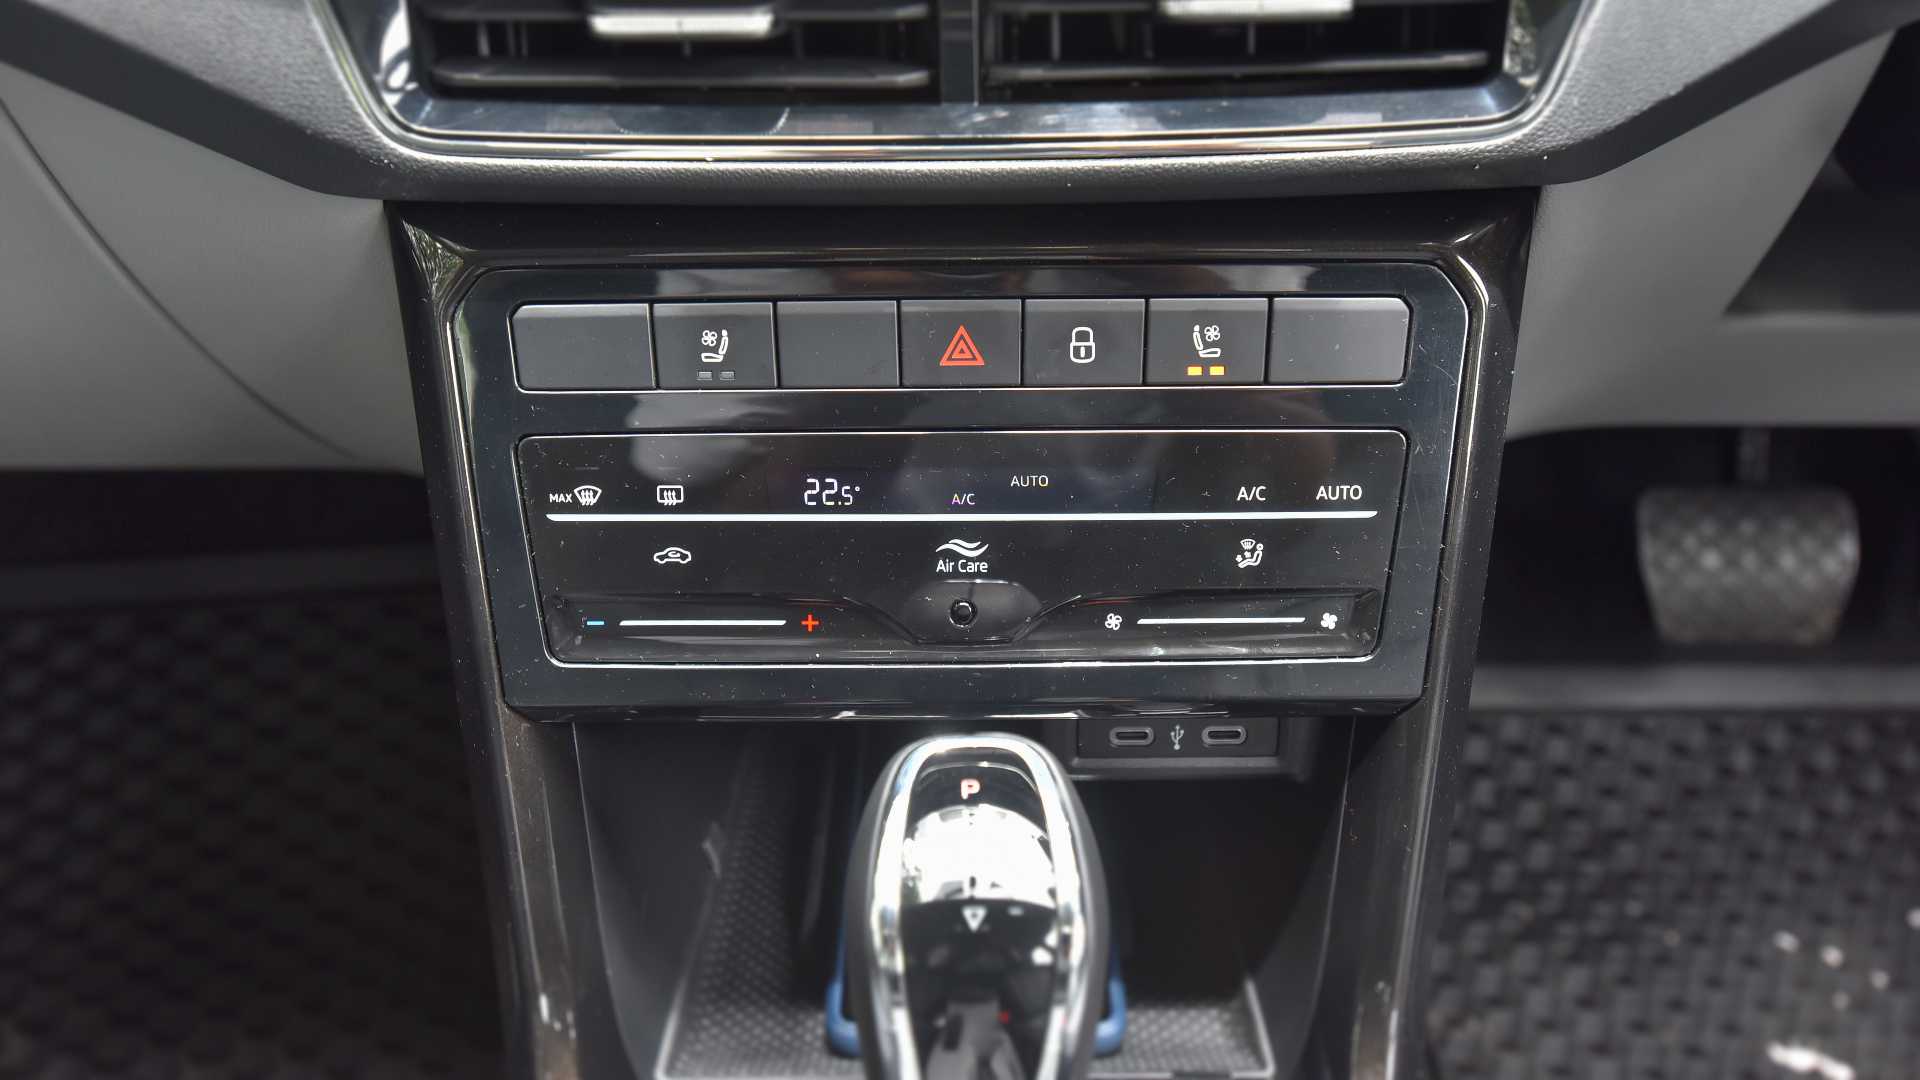 Capacitive touch controls for the climate control system provide no tactile feedback. Image: Overdrive/Anis Shaikh